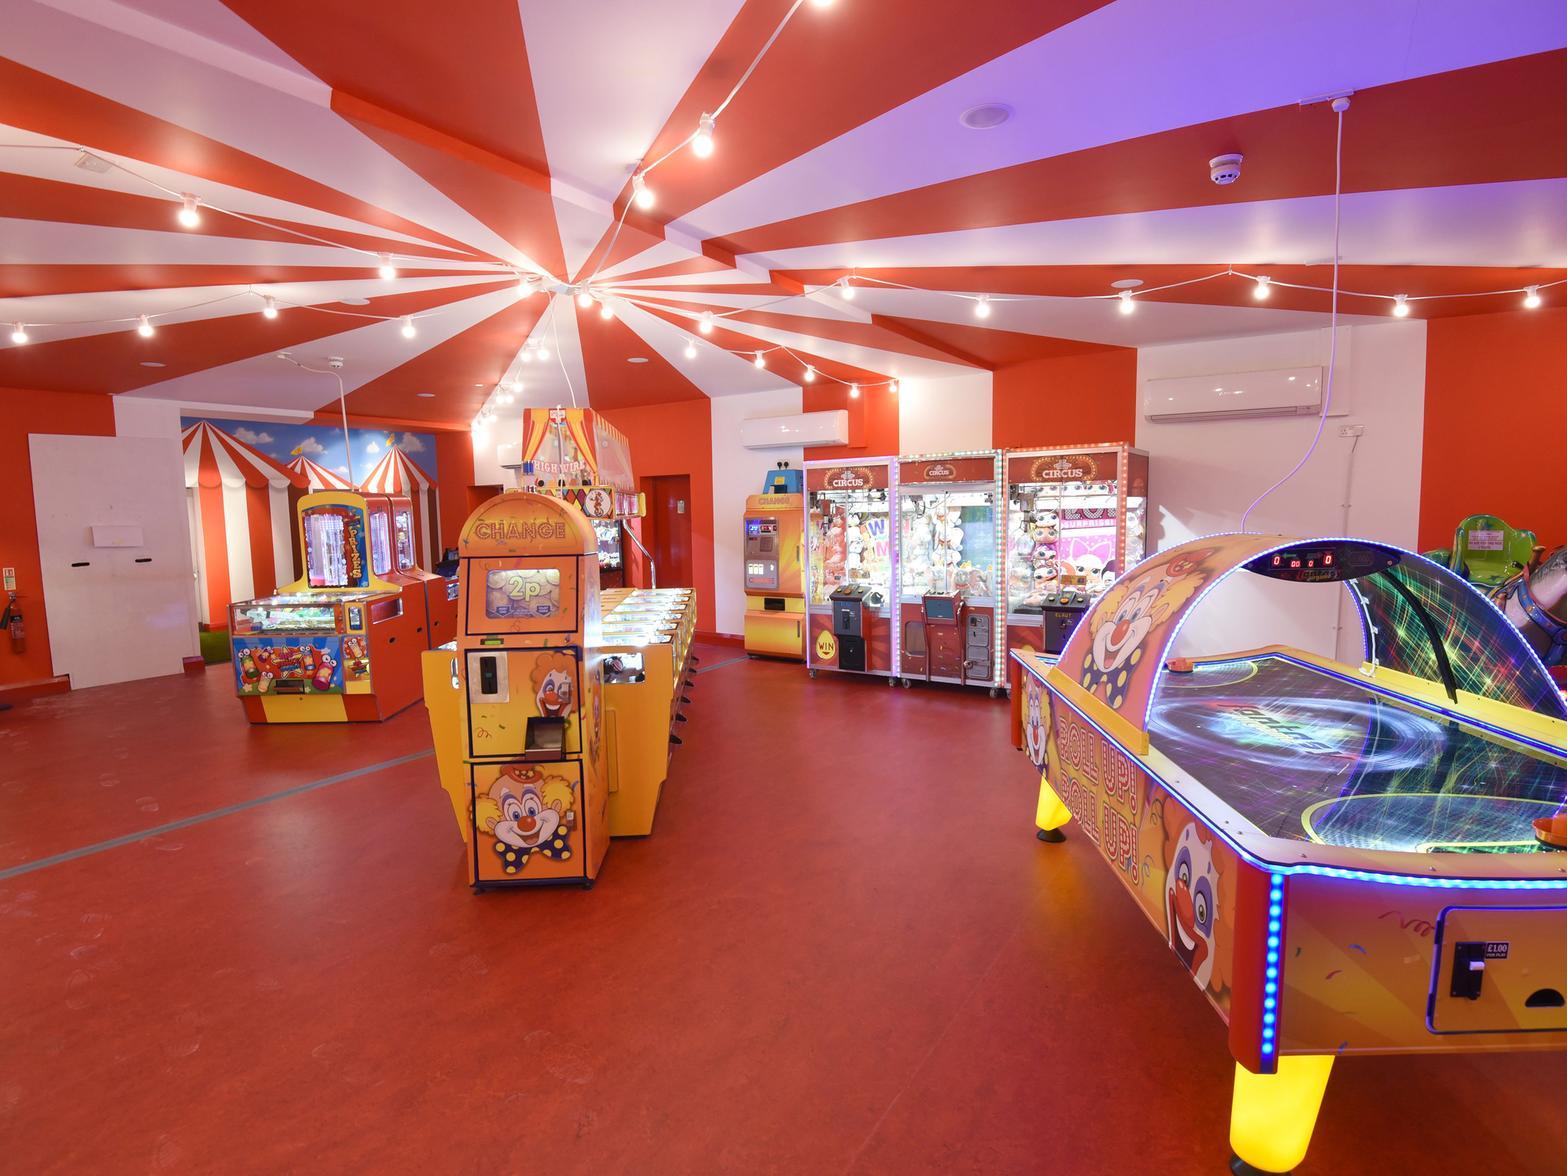 Sadly we had to say a nostalgic farewell to Jungle Jim's in 2019. Following its overhaul in 2007 it was decided to close the play area in May 2019. The space is now home to The Fifth Floor entertainment complex.